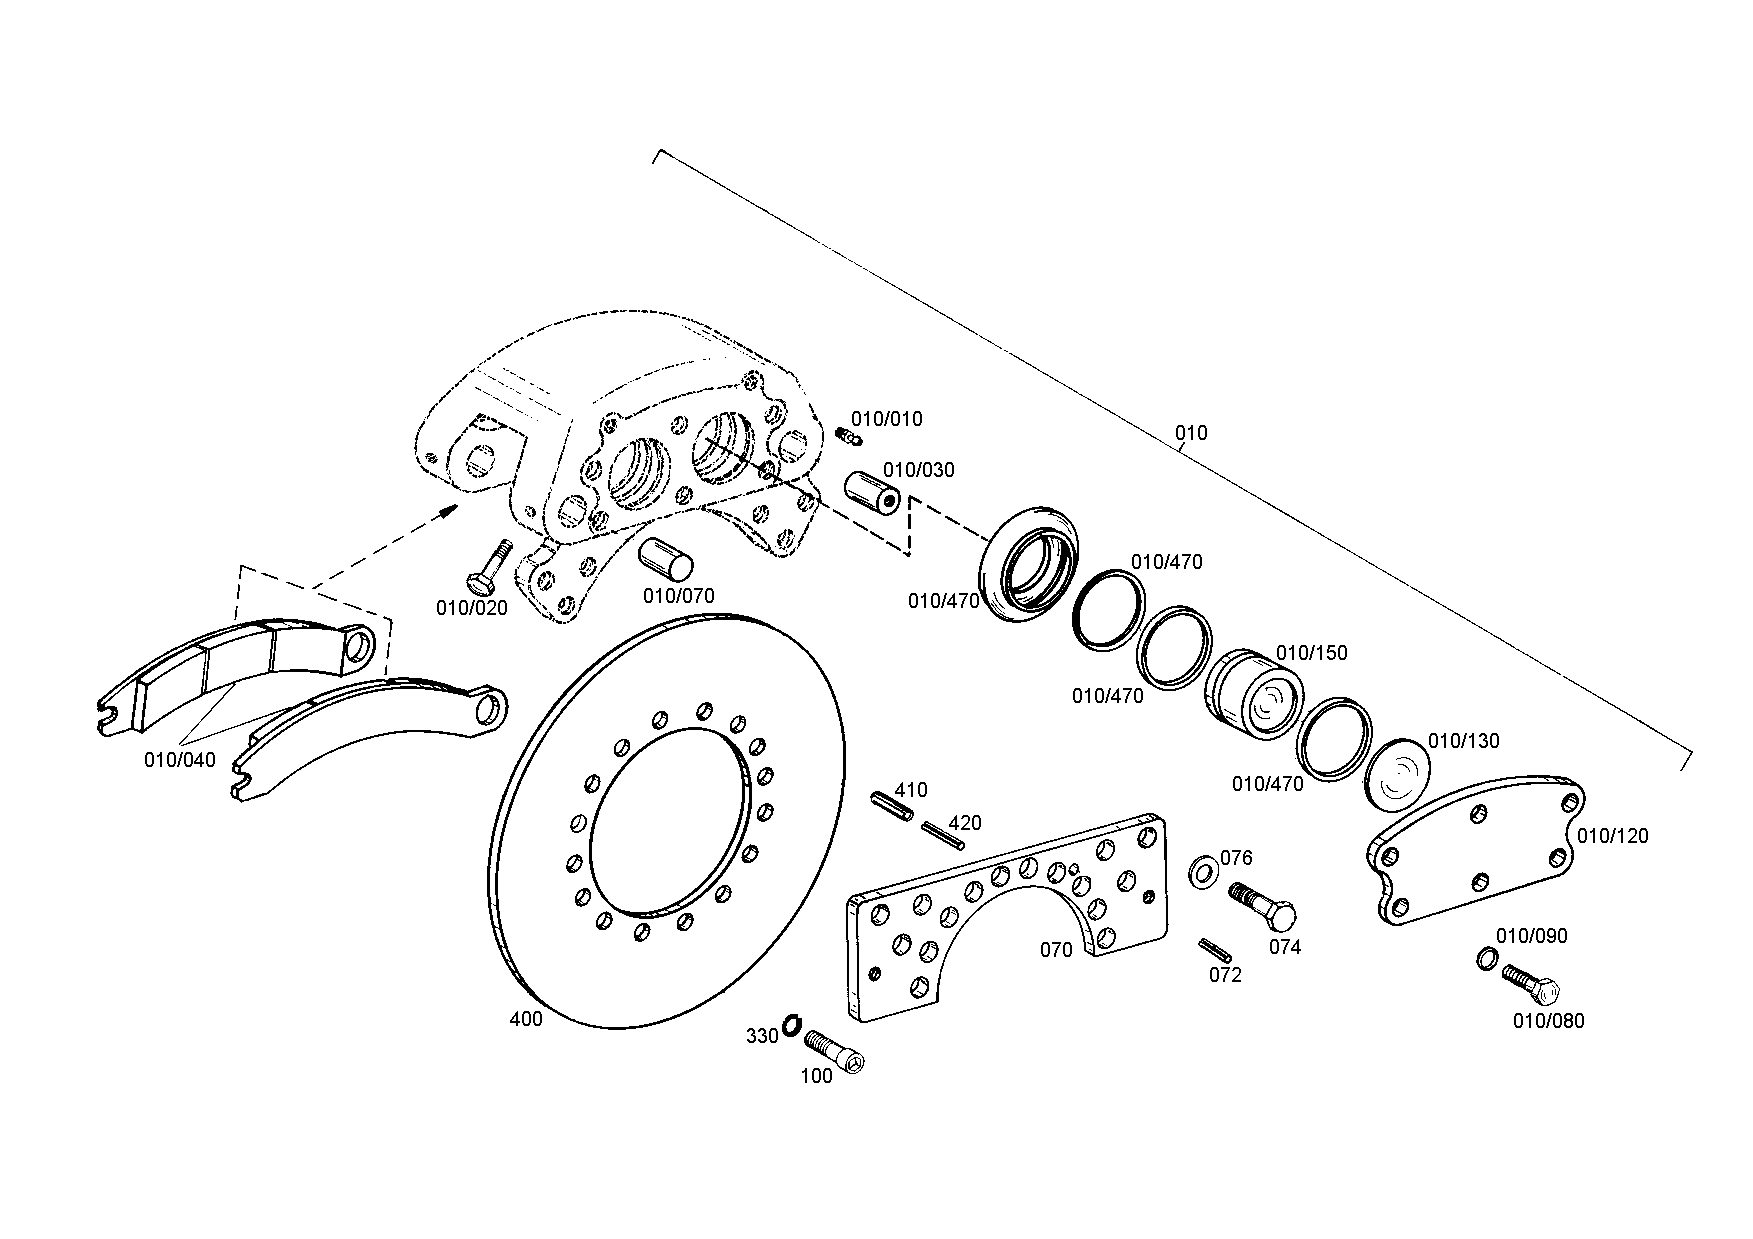 drawing for CNH NEW HOLLAND 8900128697 - LOCKING PIN (figure 5)